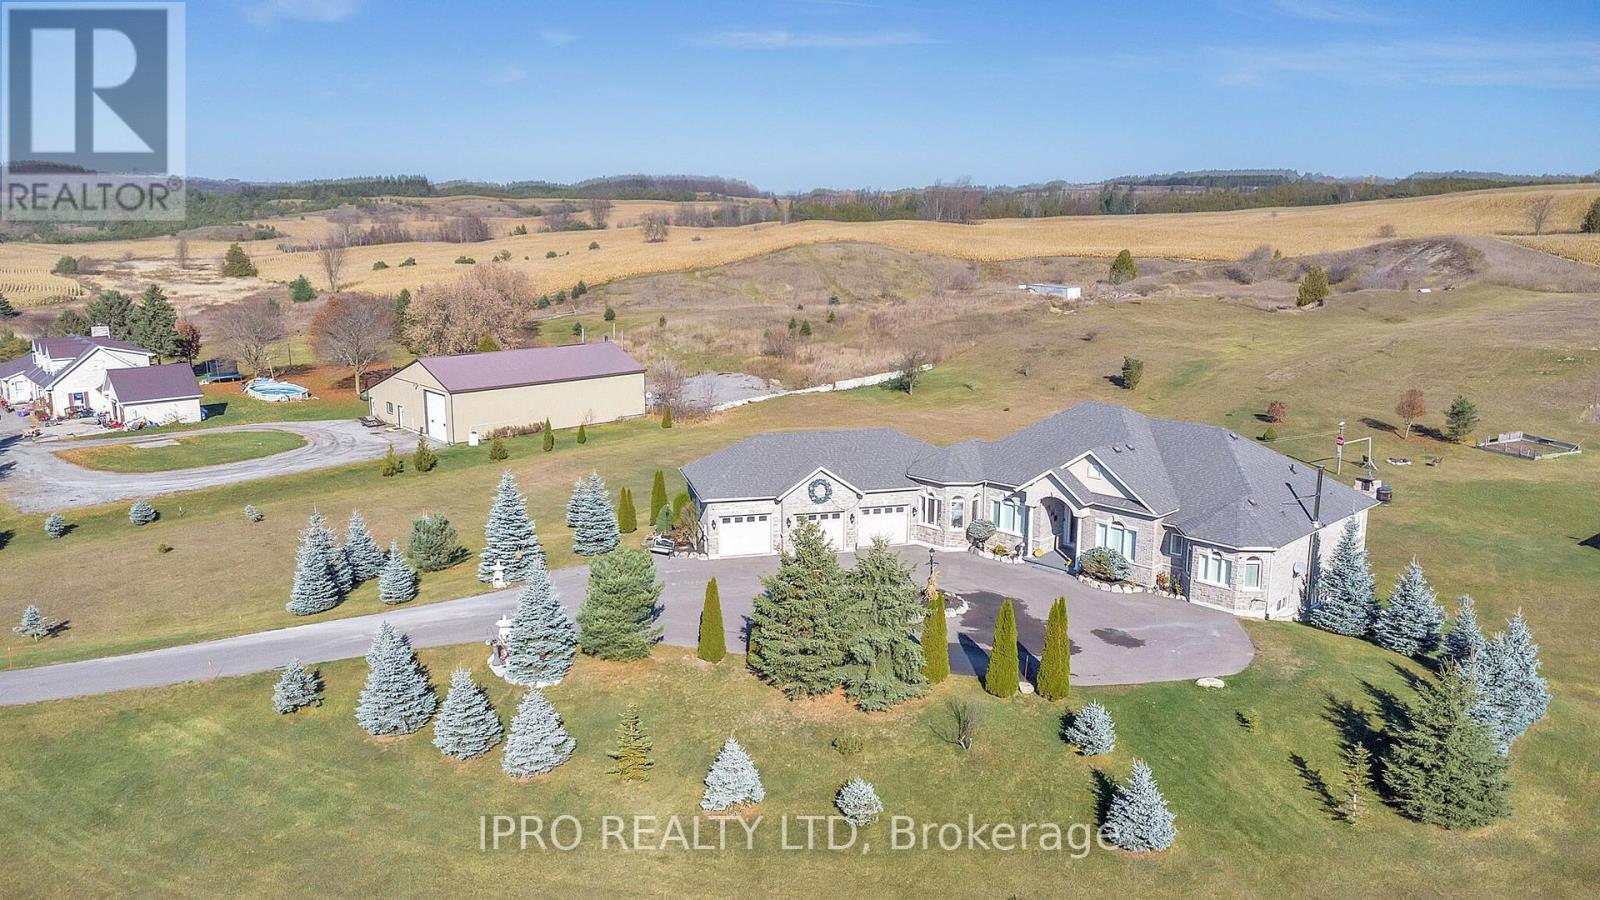 20051 Willoughby Rd, Caledon, Ontario  L7K 1W1 - Photo 2 - W8277608